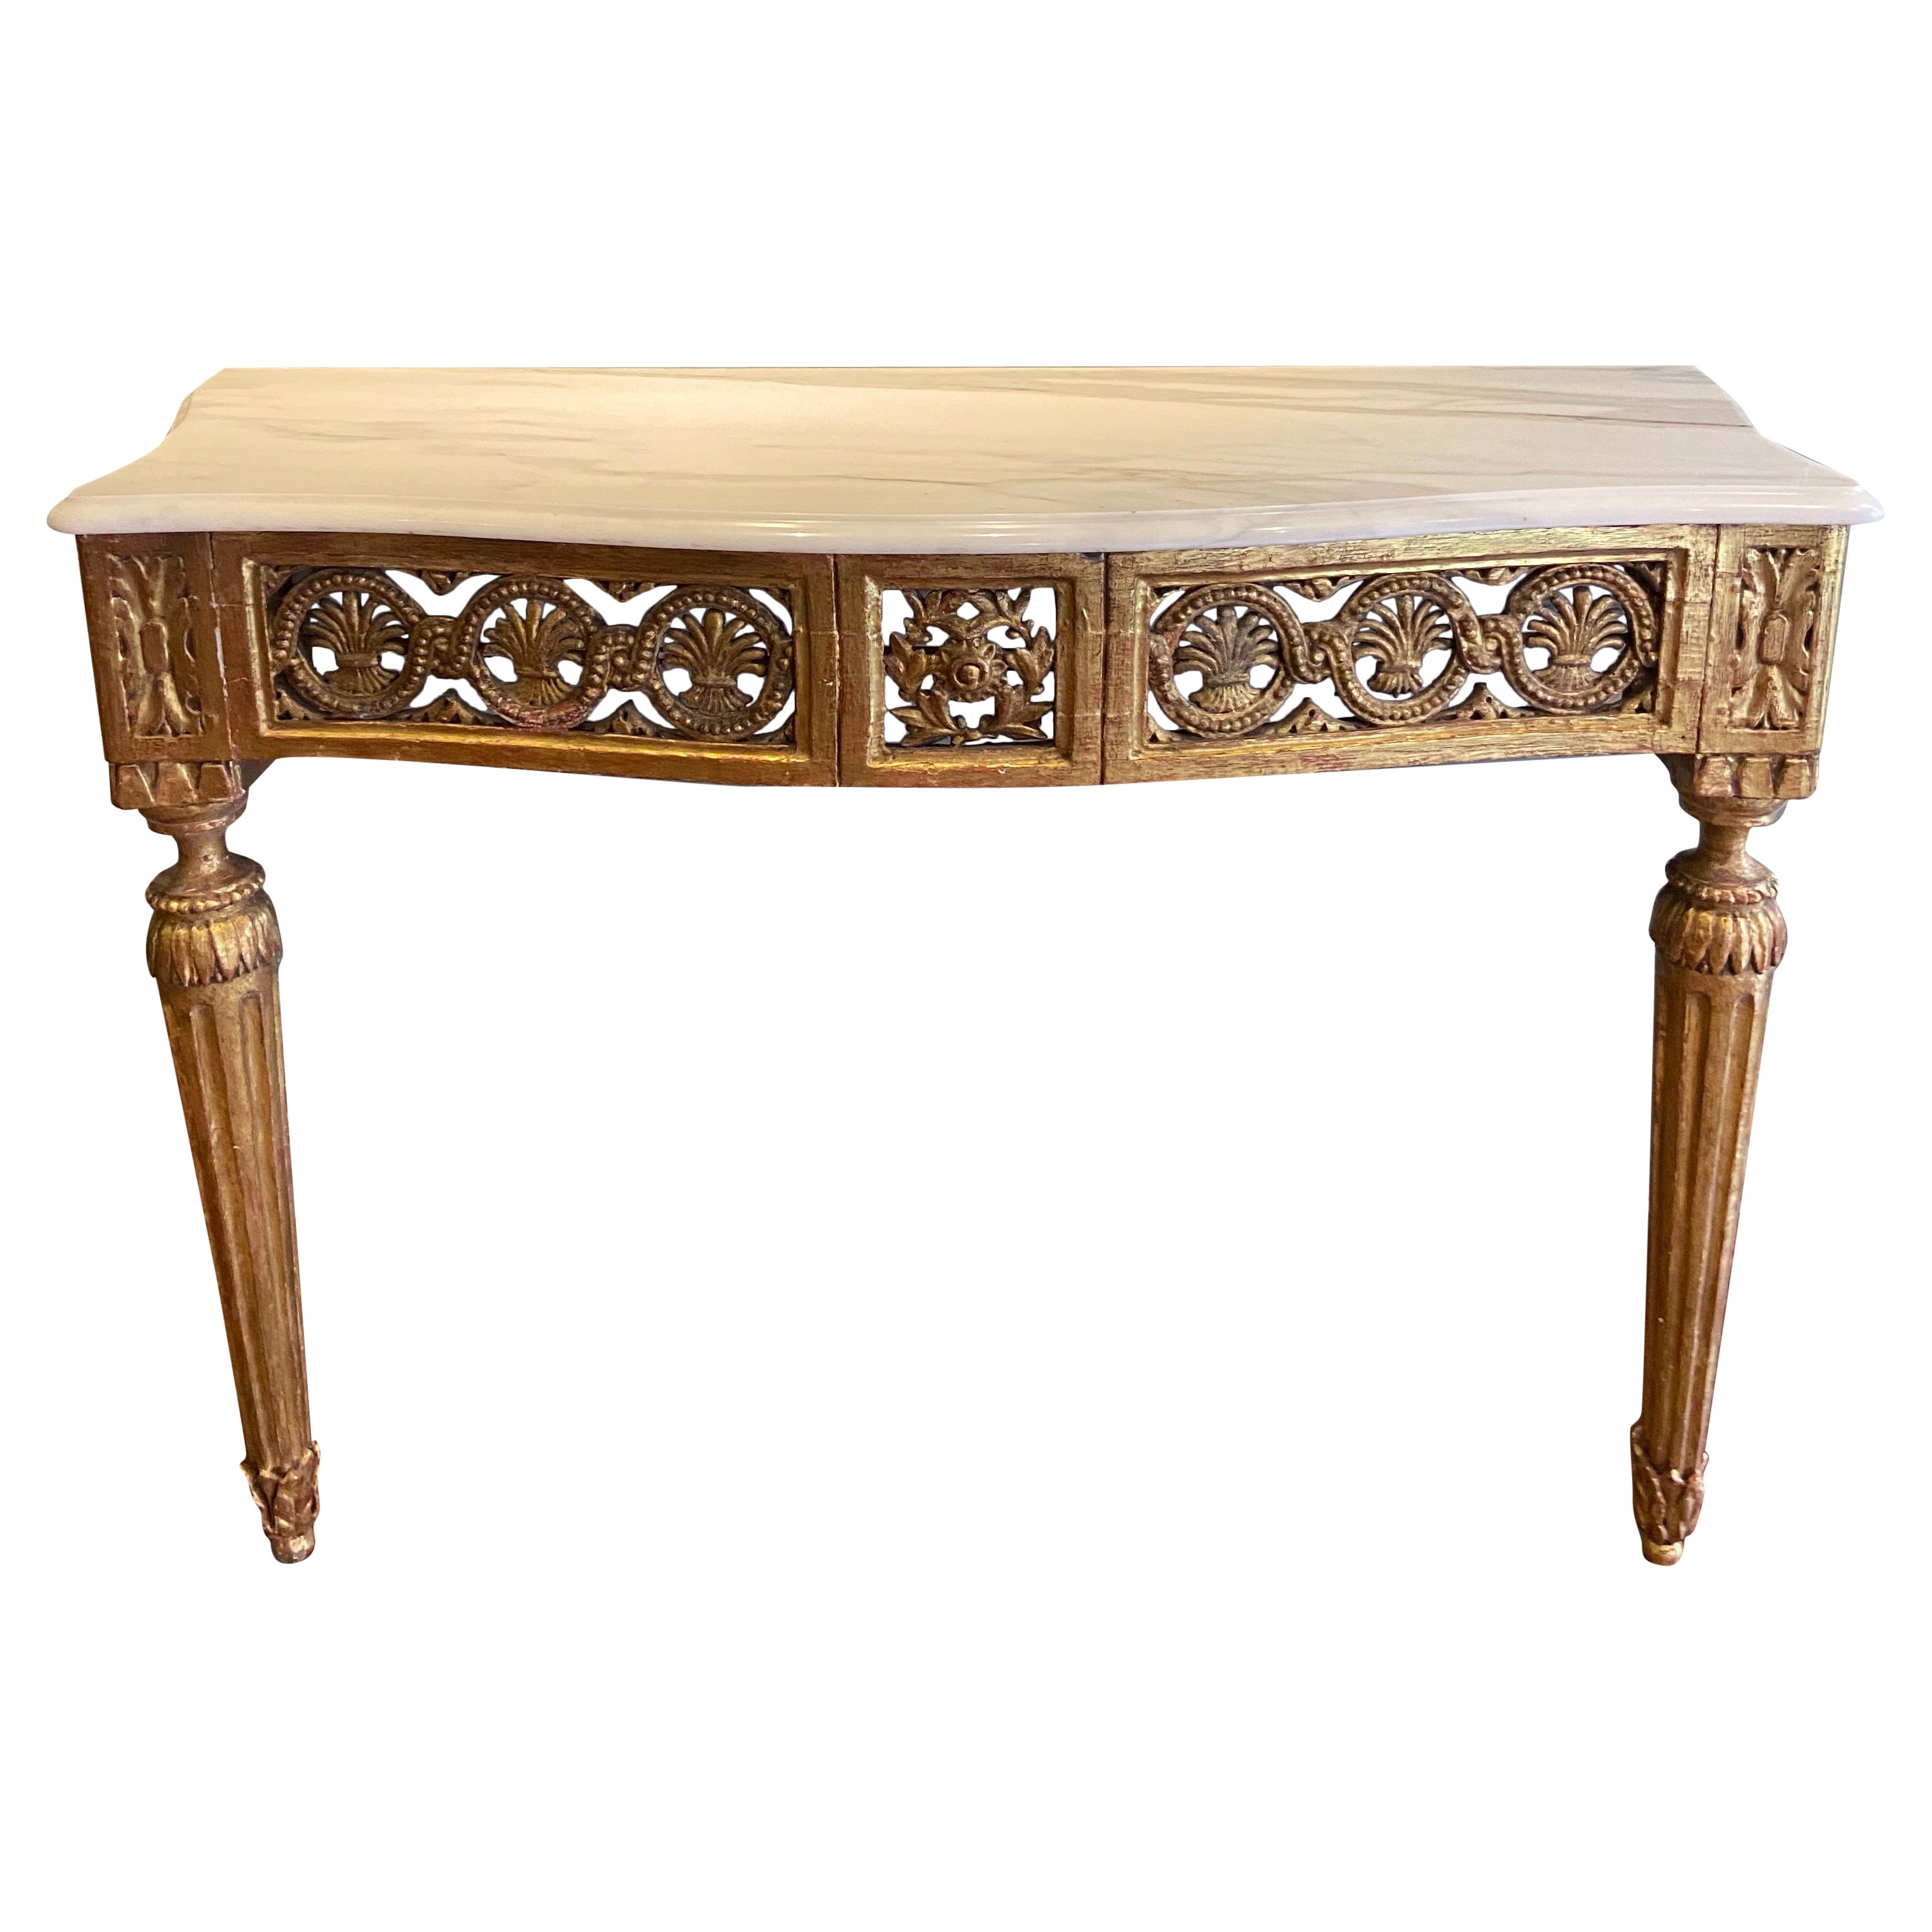 Northern Italian Serpentine Carved Gilt-Wood Console Table 'Late 18th Century'